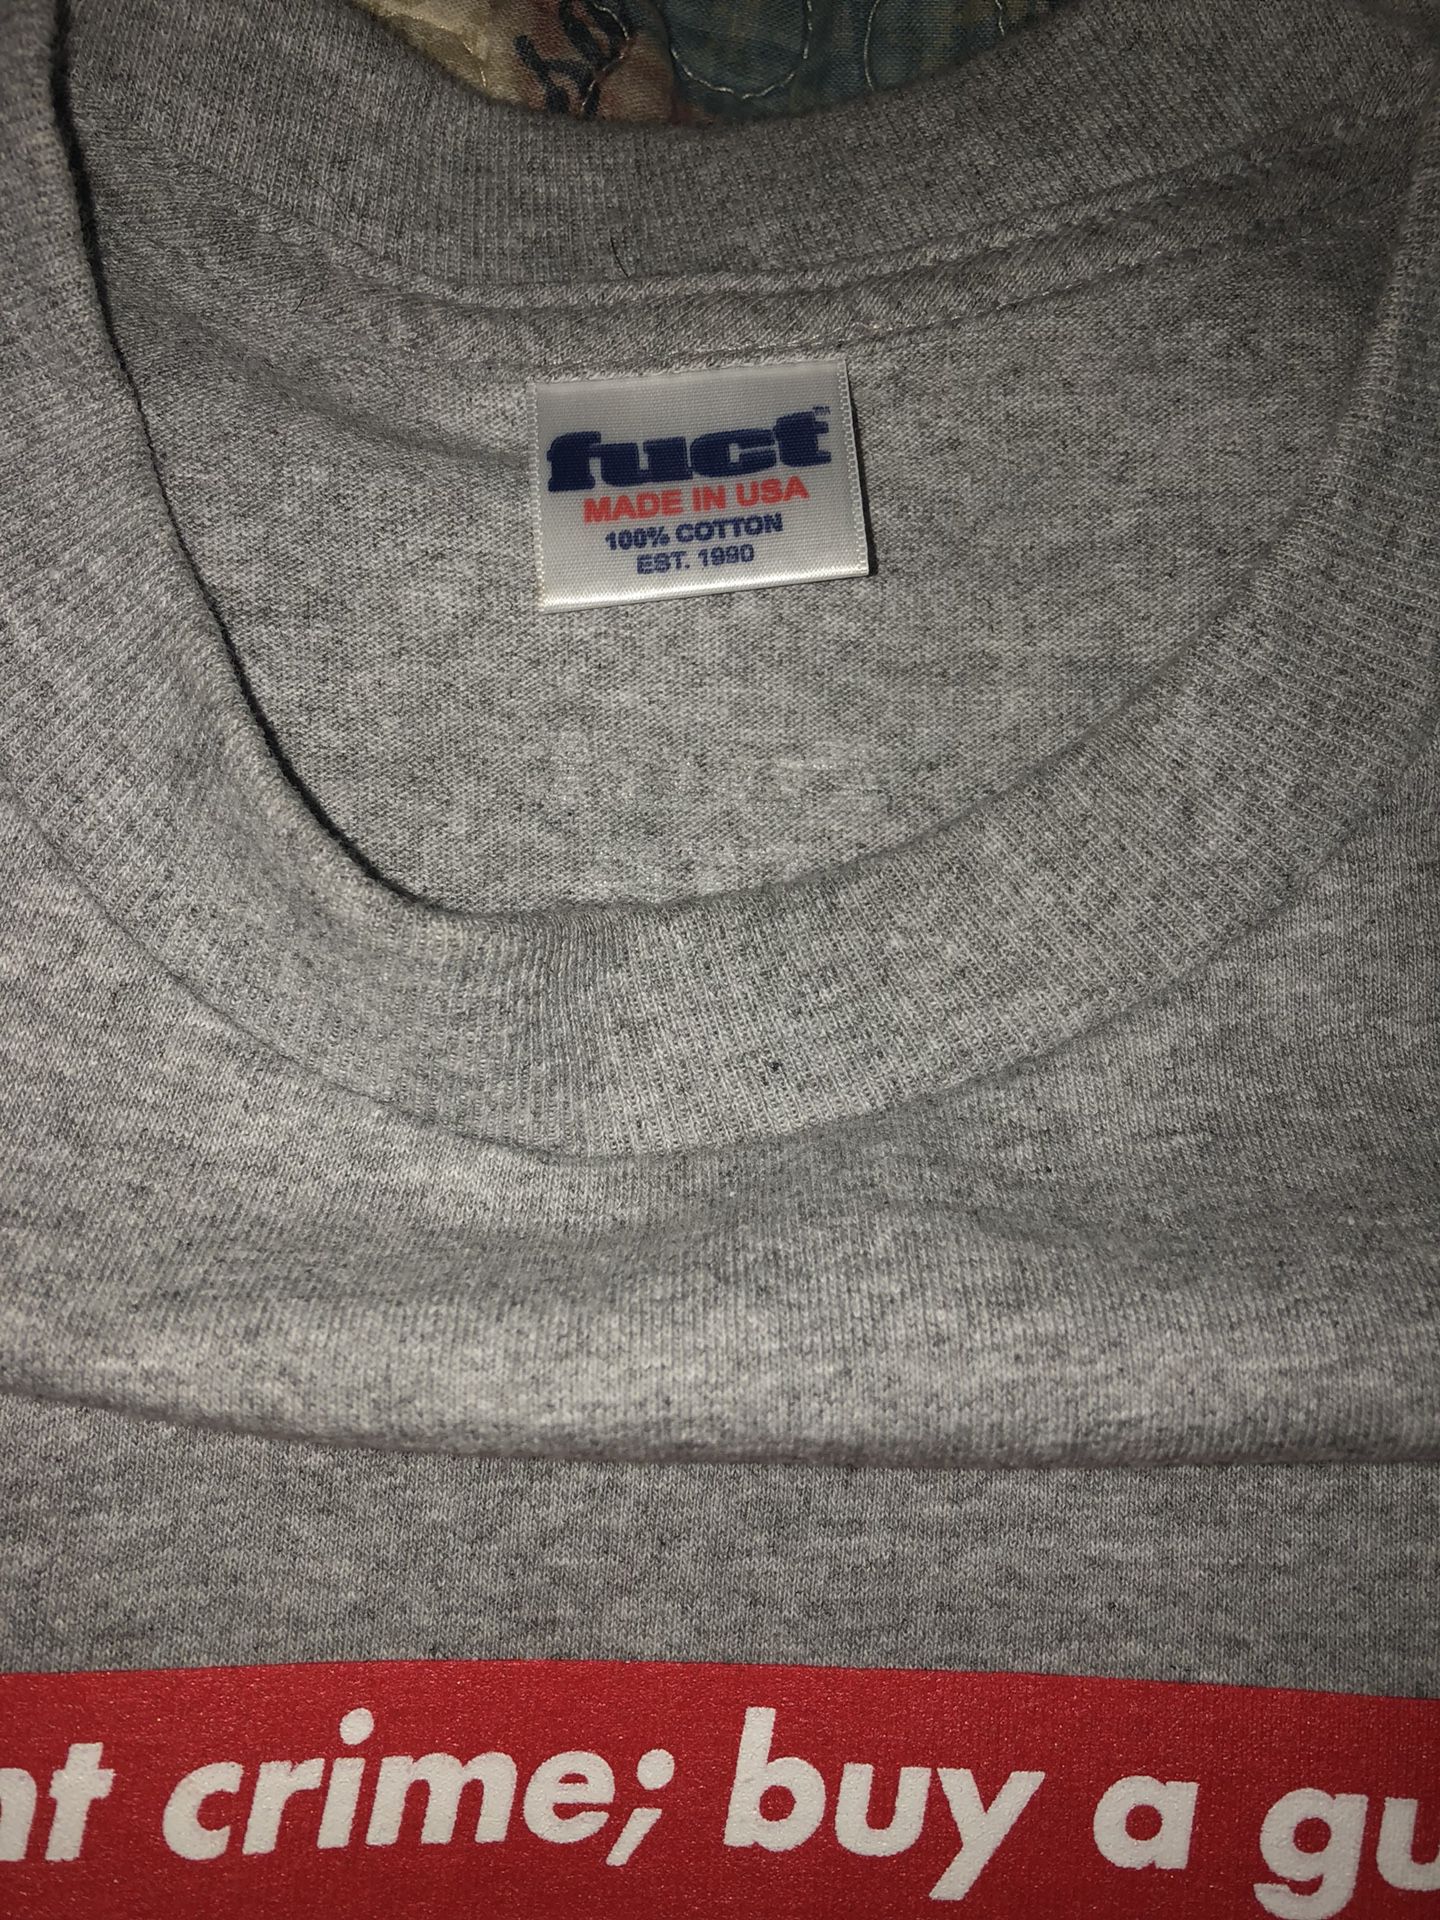 LVFT x Afters t-shirt for Sale in City of Industry, CA - OfferUp